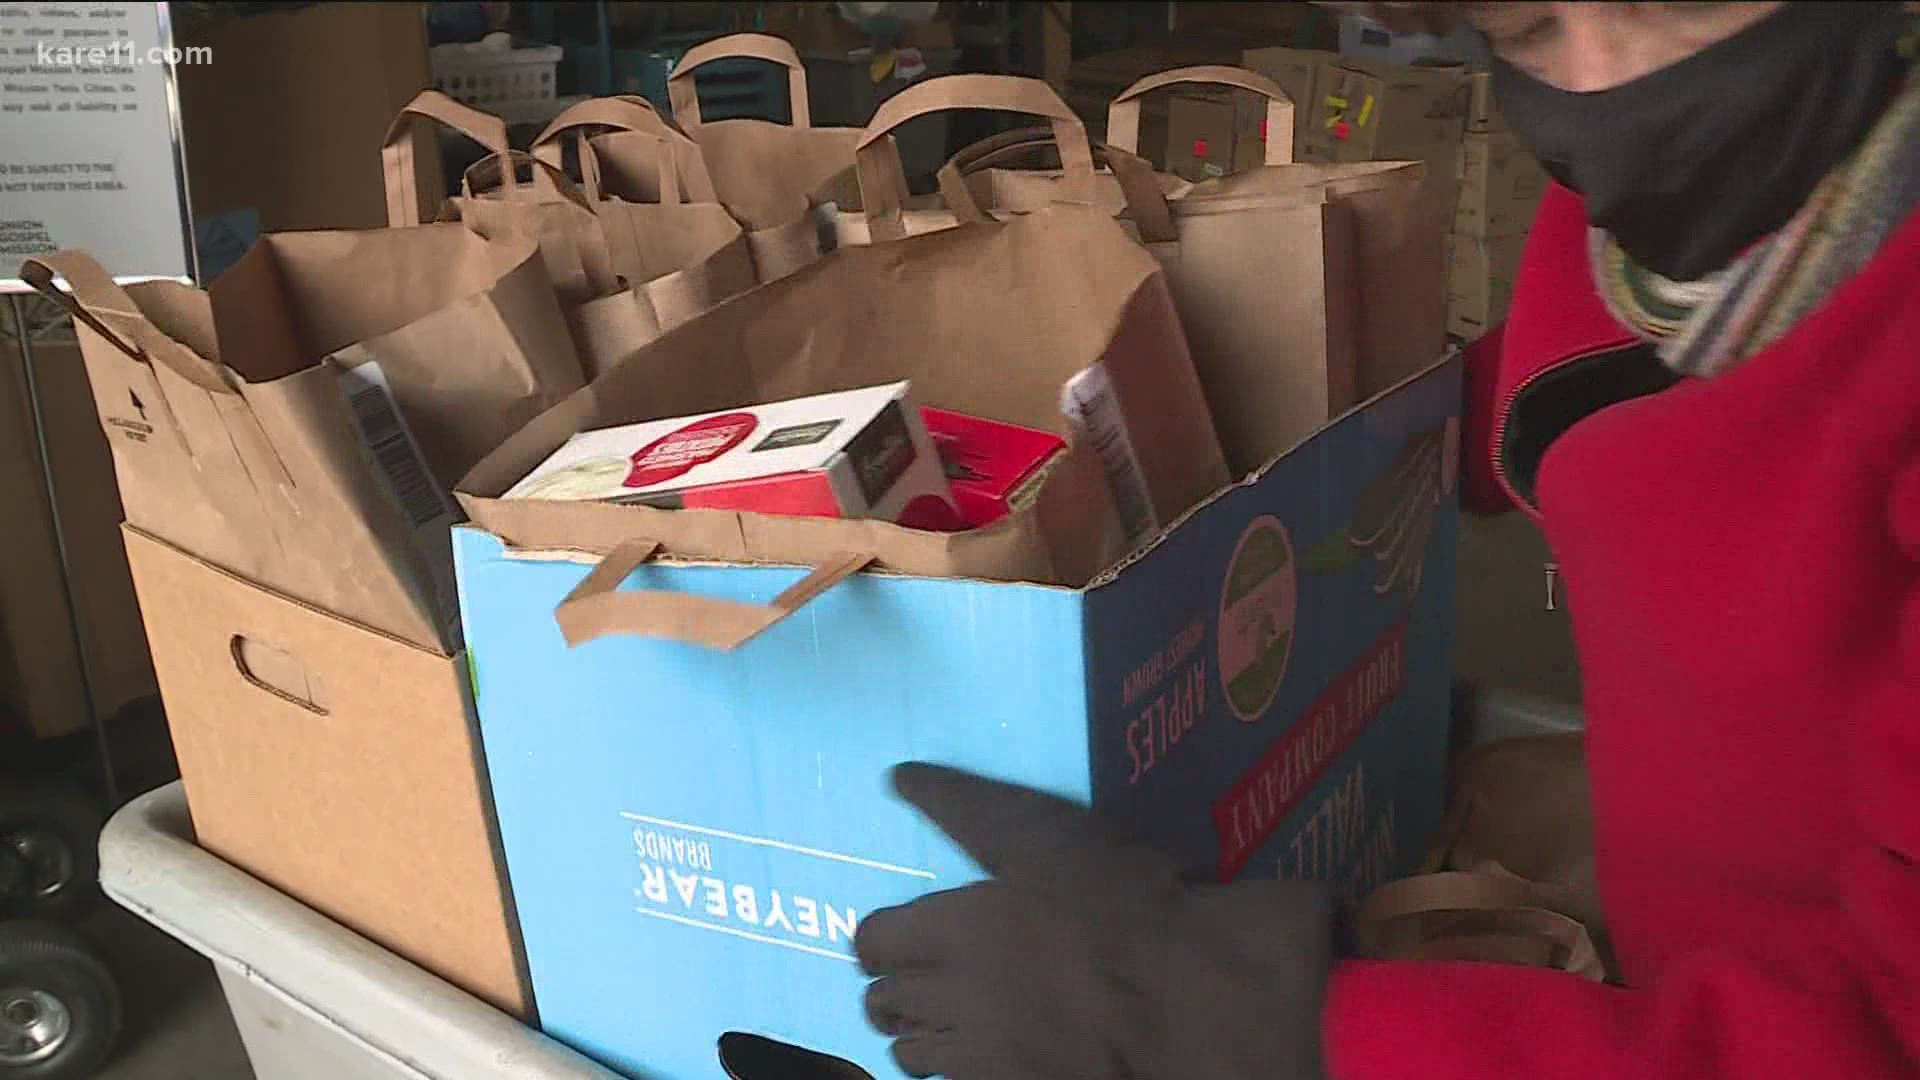 The nonprofit is serving up a special holiday giveaway. Thousands of families in need will be able to have a warm Thanksgiving meal at home.